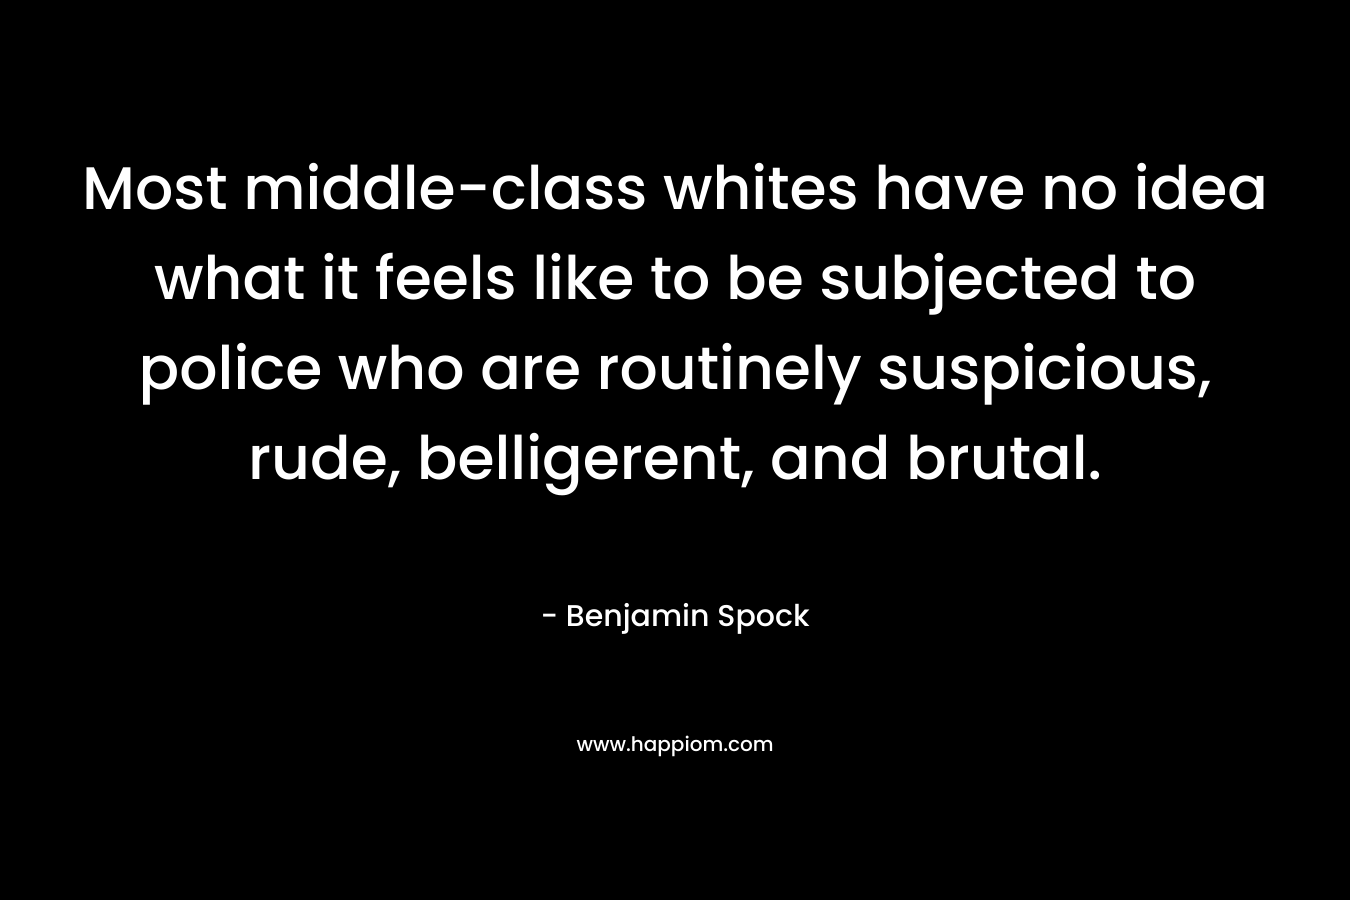 Most middle-class whites have no idea what it feels like to be subjected to police who are routinely suspicious, rude, belligerent, and brutal. – Benjamin Spock